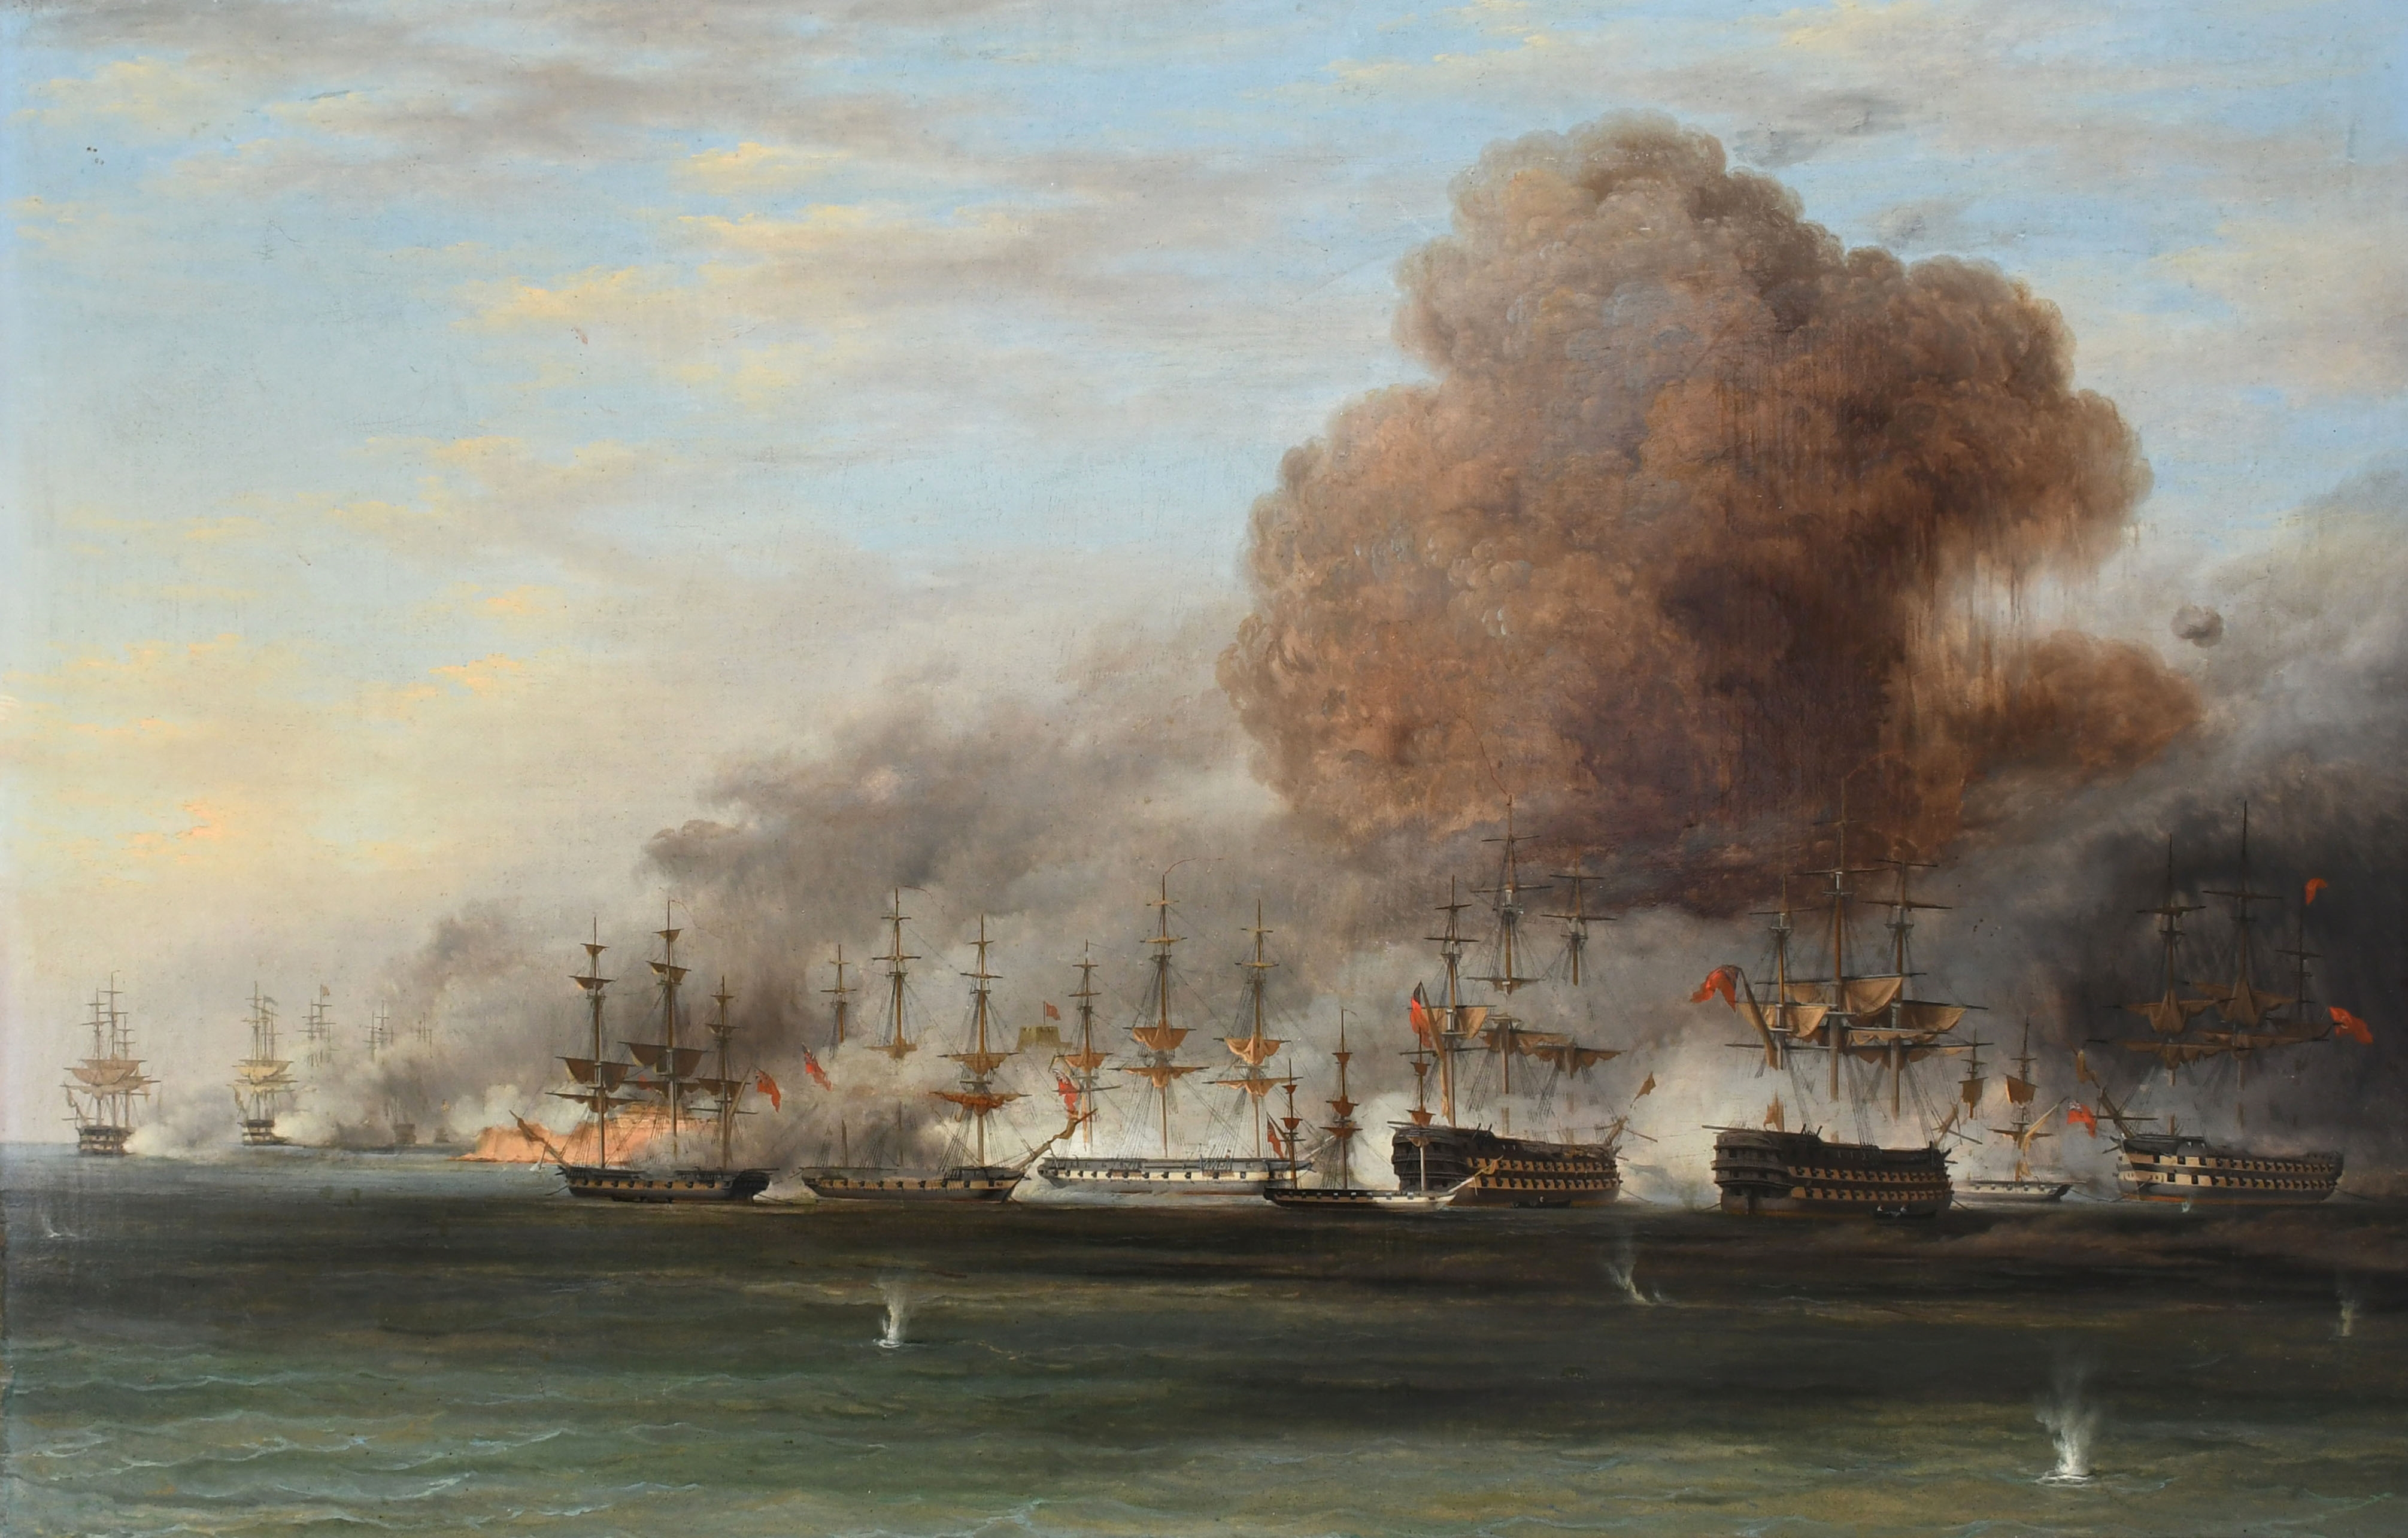 The British and Ottoman fleets in close action at the Battle of Navarino, 20 October 1827, with the two flagships duelling in the right foreground - Anton Schranz